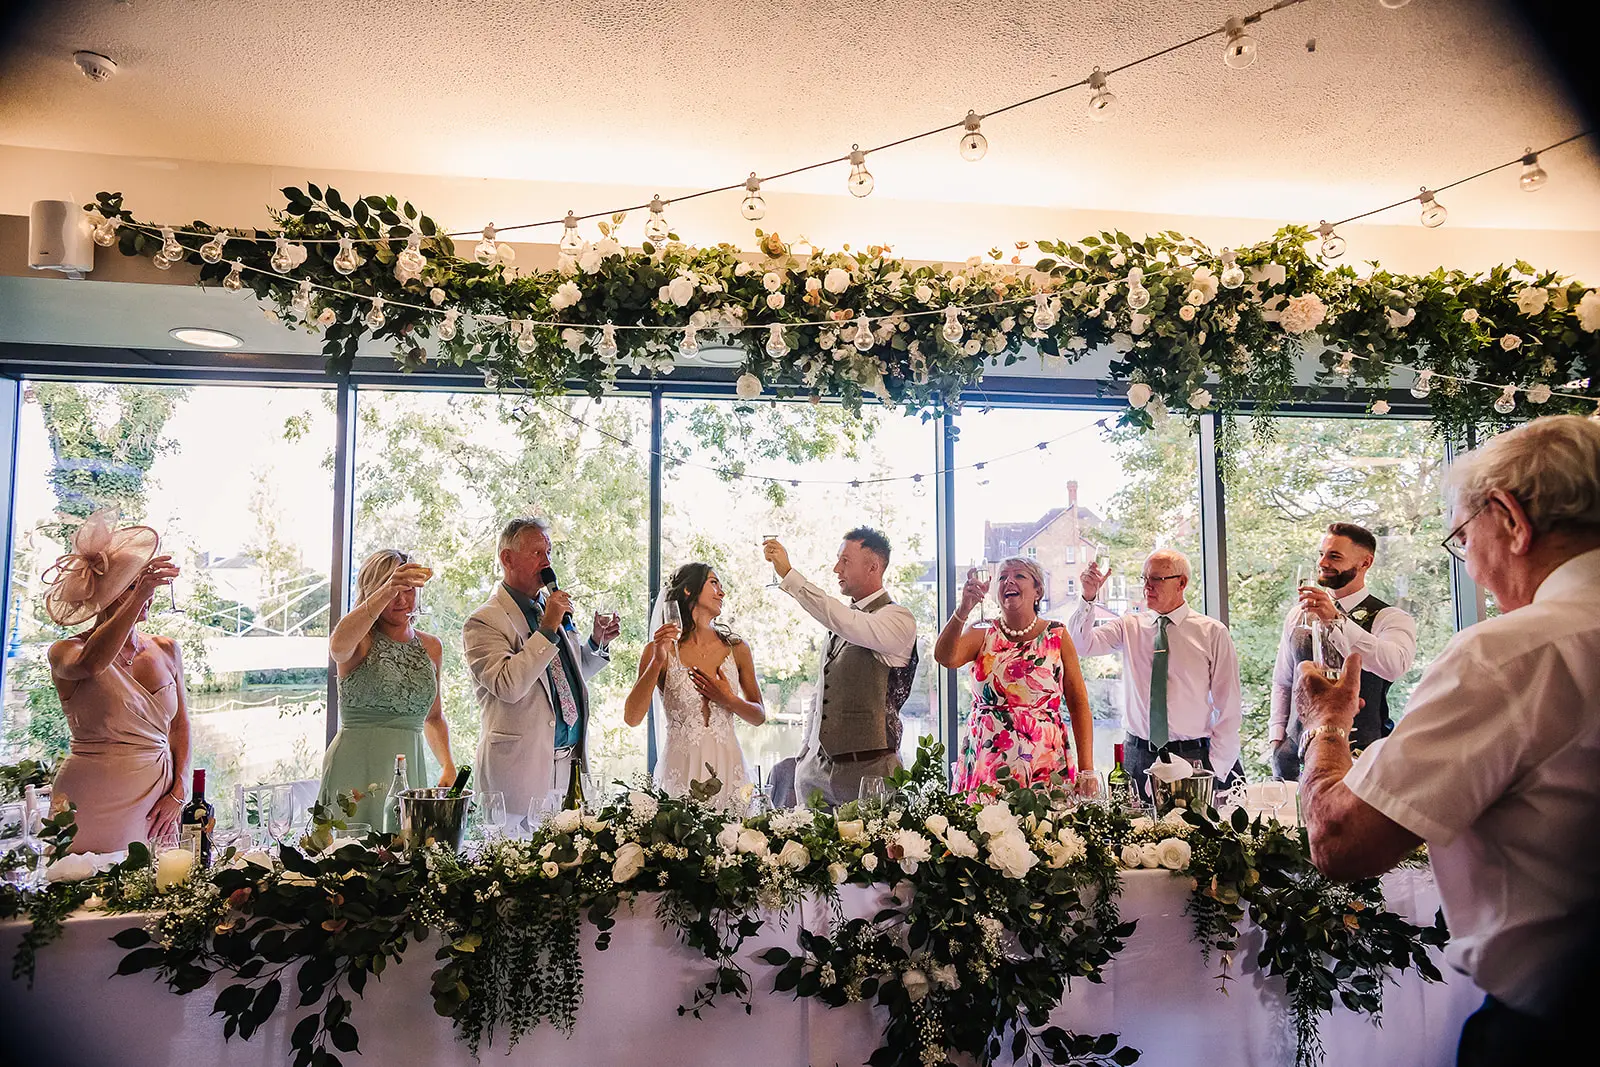 group of people enjoying themselves at a wedding